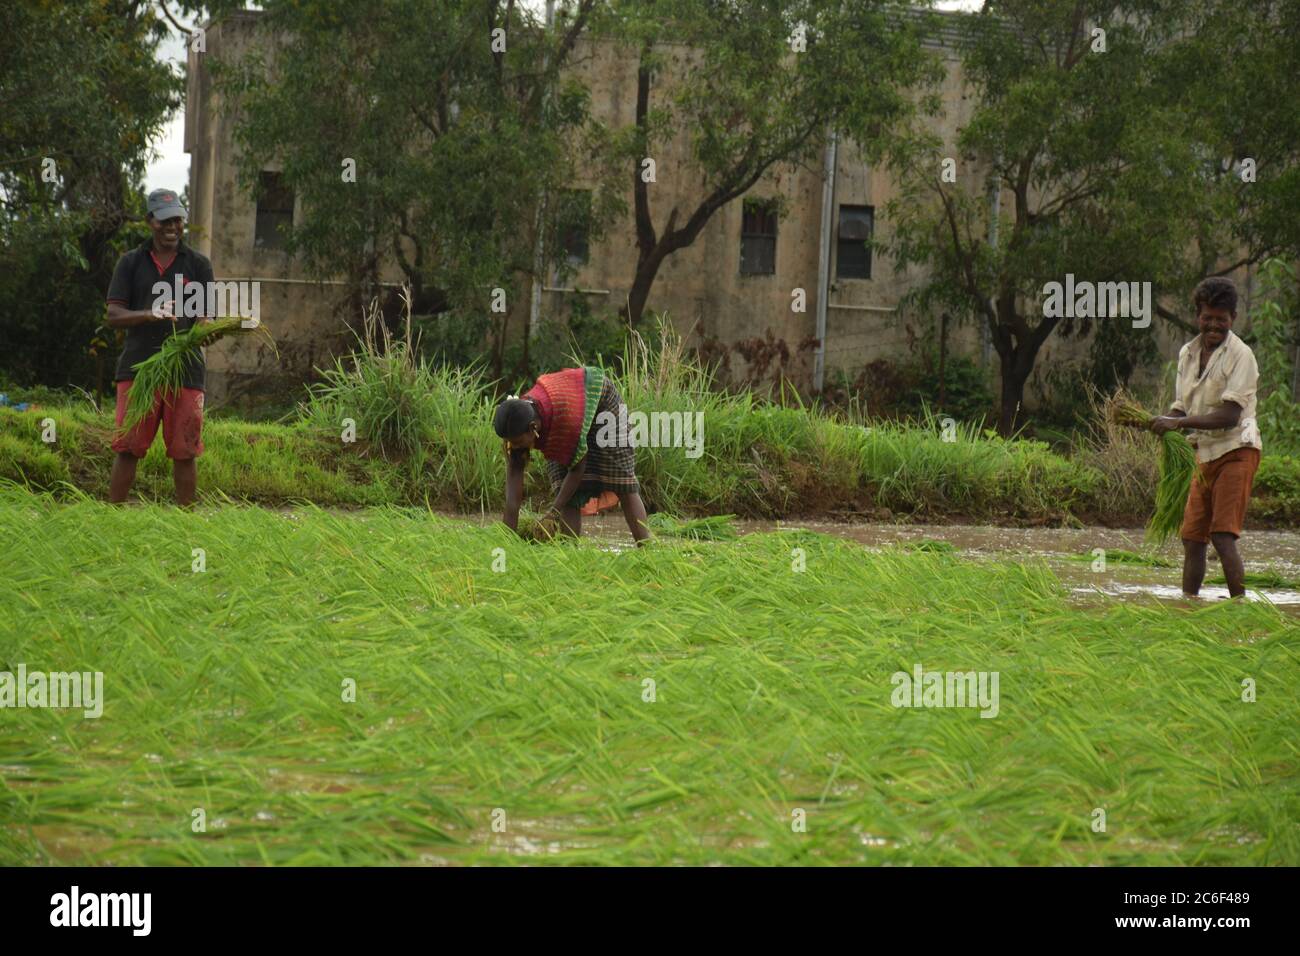 Akole village near Pune, India - July 3, 2020: Farmhands sow rice sampling at a flooded paddy field in Akole village near Pune, India, on Friday, July Stock Photo